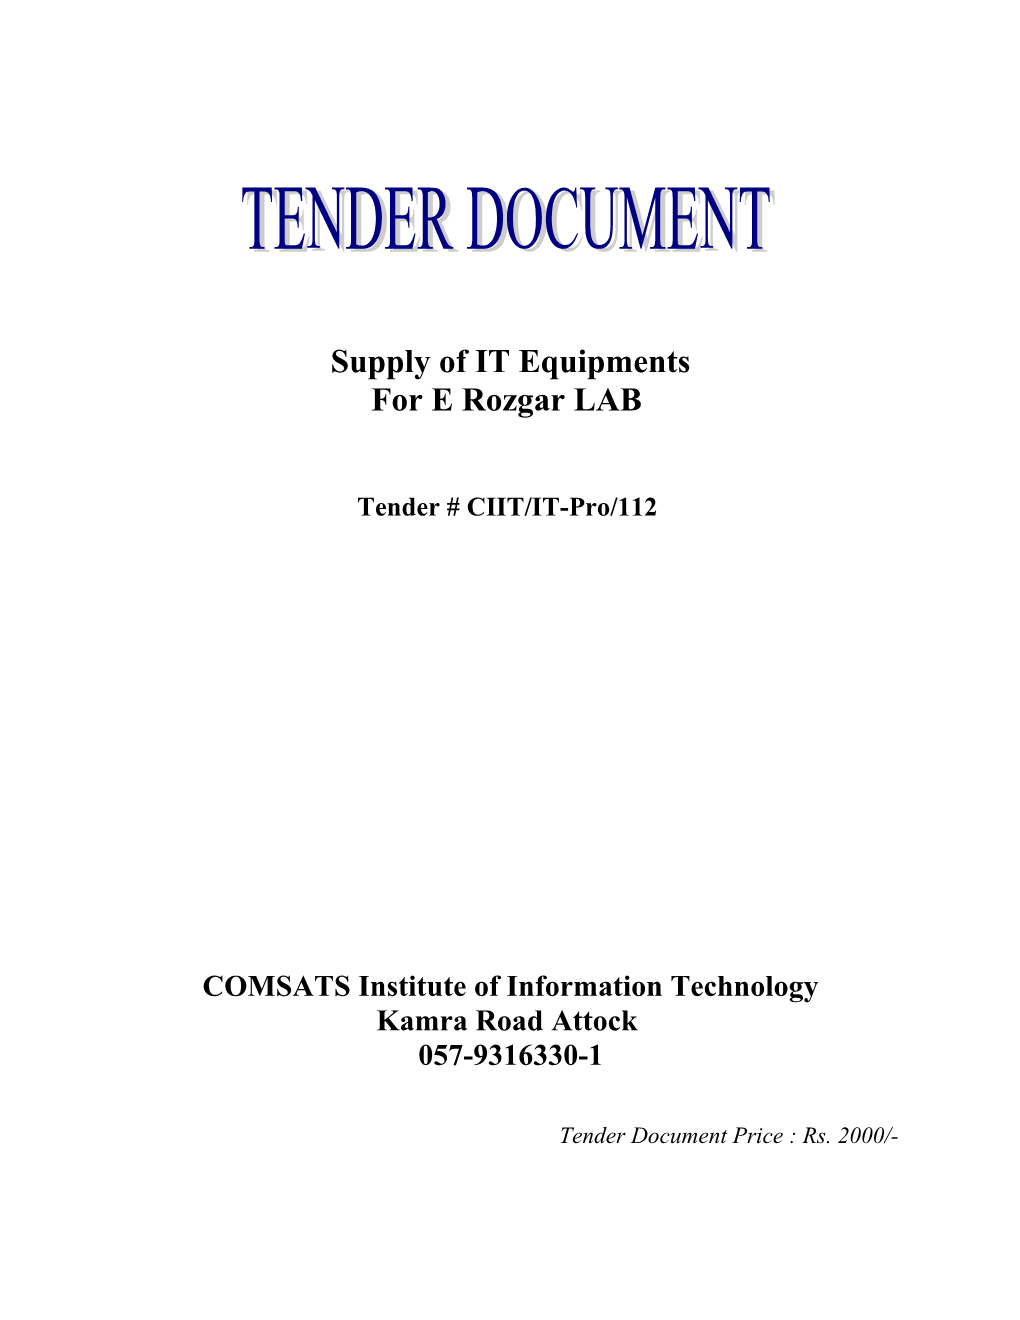 Supply of IT Equipments